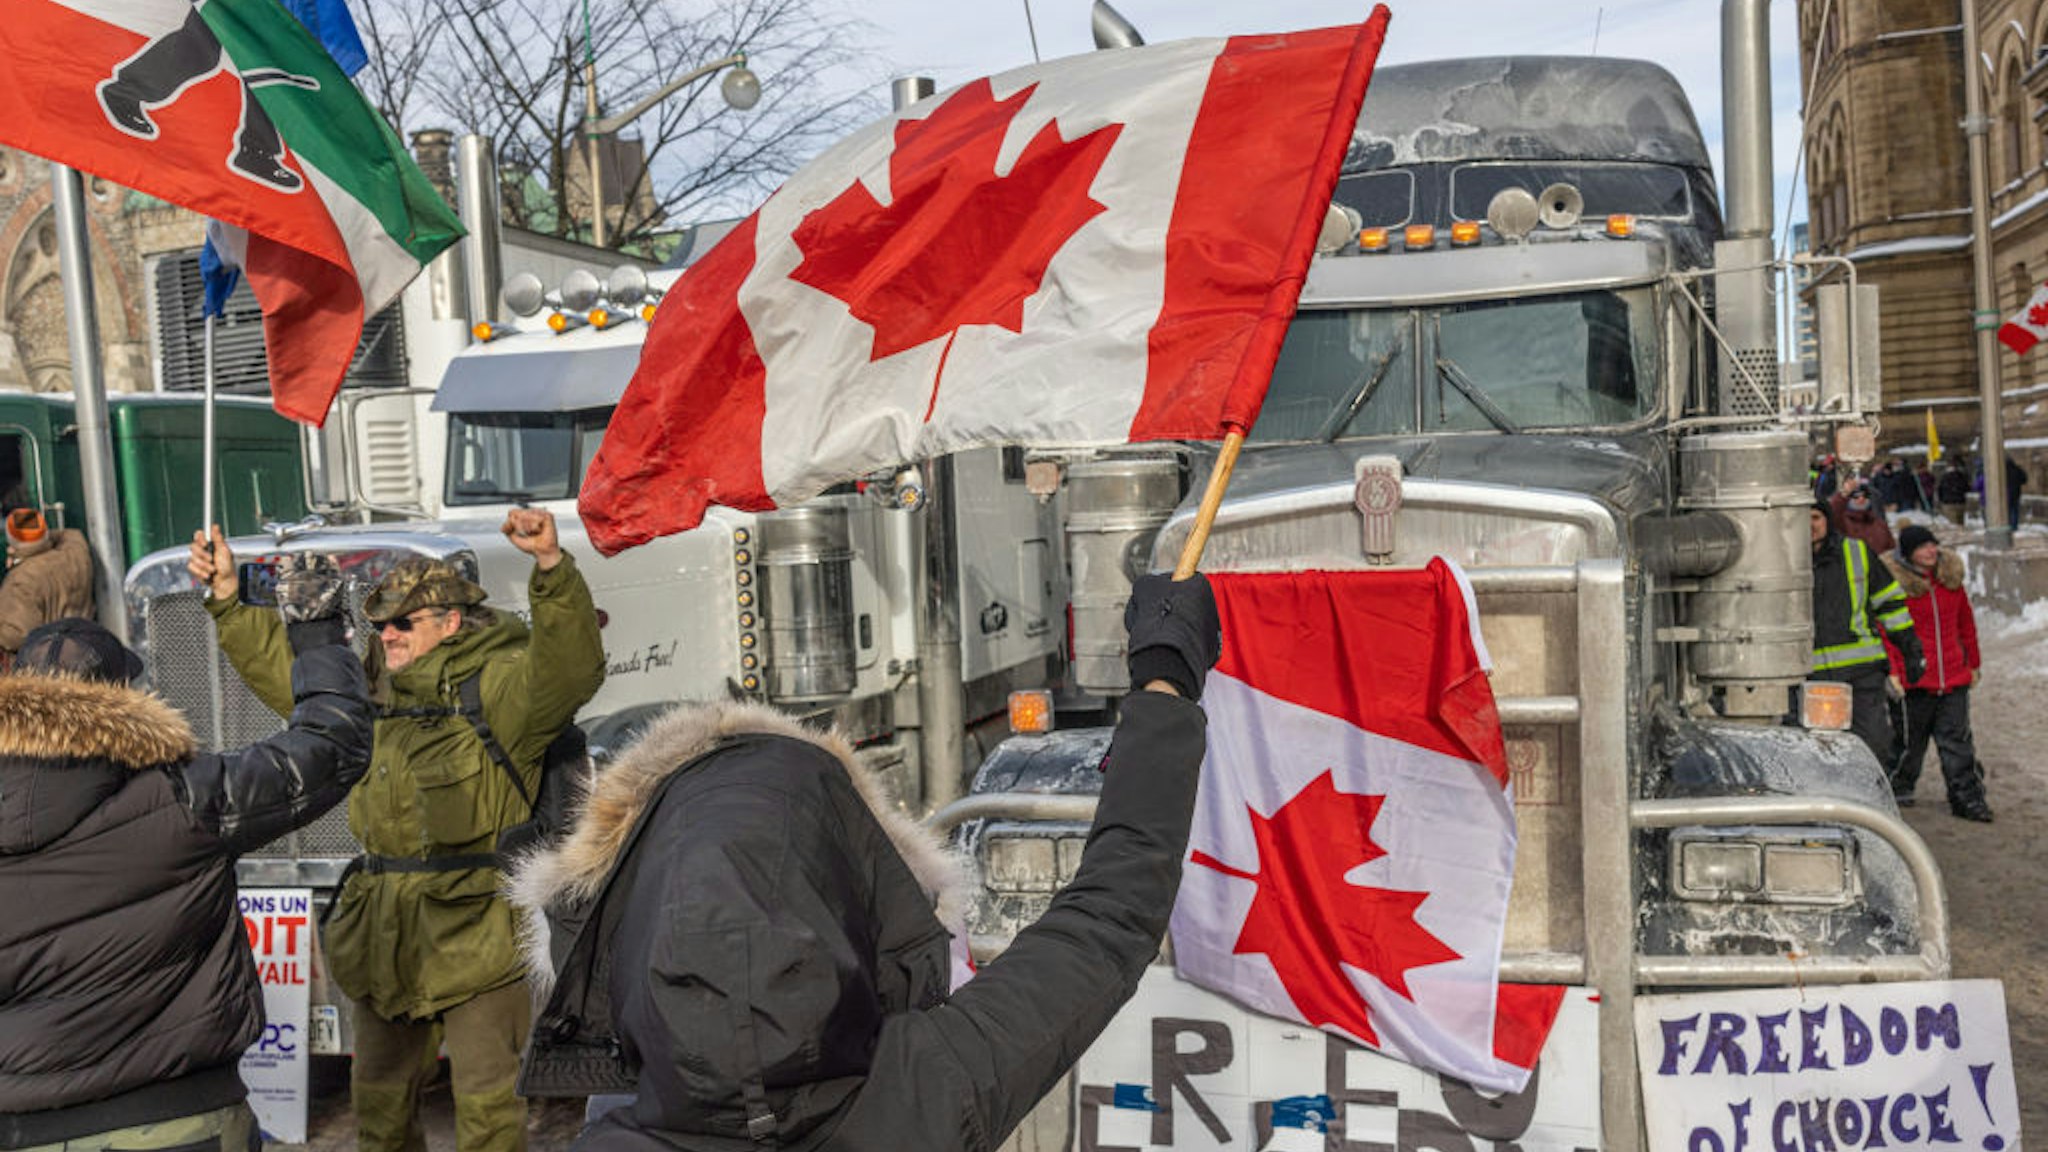 OTTAWA, ON - JANUARY 30: A woman waves a flag and cheers on truckers in protest of COVID-19 vaccine mandates on January 30, 2022 in Ottawa, Canada. Thousands turned up over the weekend to rally in support of truckers using their vehicles to block access to Parliament Hill, most of the downtown area Ottawa, and the Alberta border in hopes of pressuring the government to roll back COVID-19 public health regulations. (Photo by Alex Kent/Getty Images)